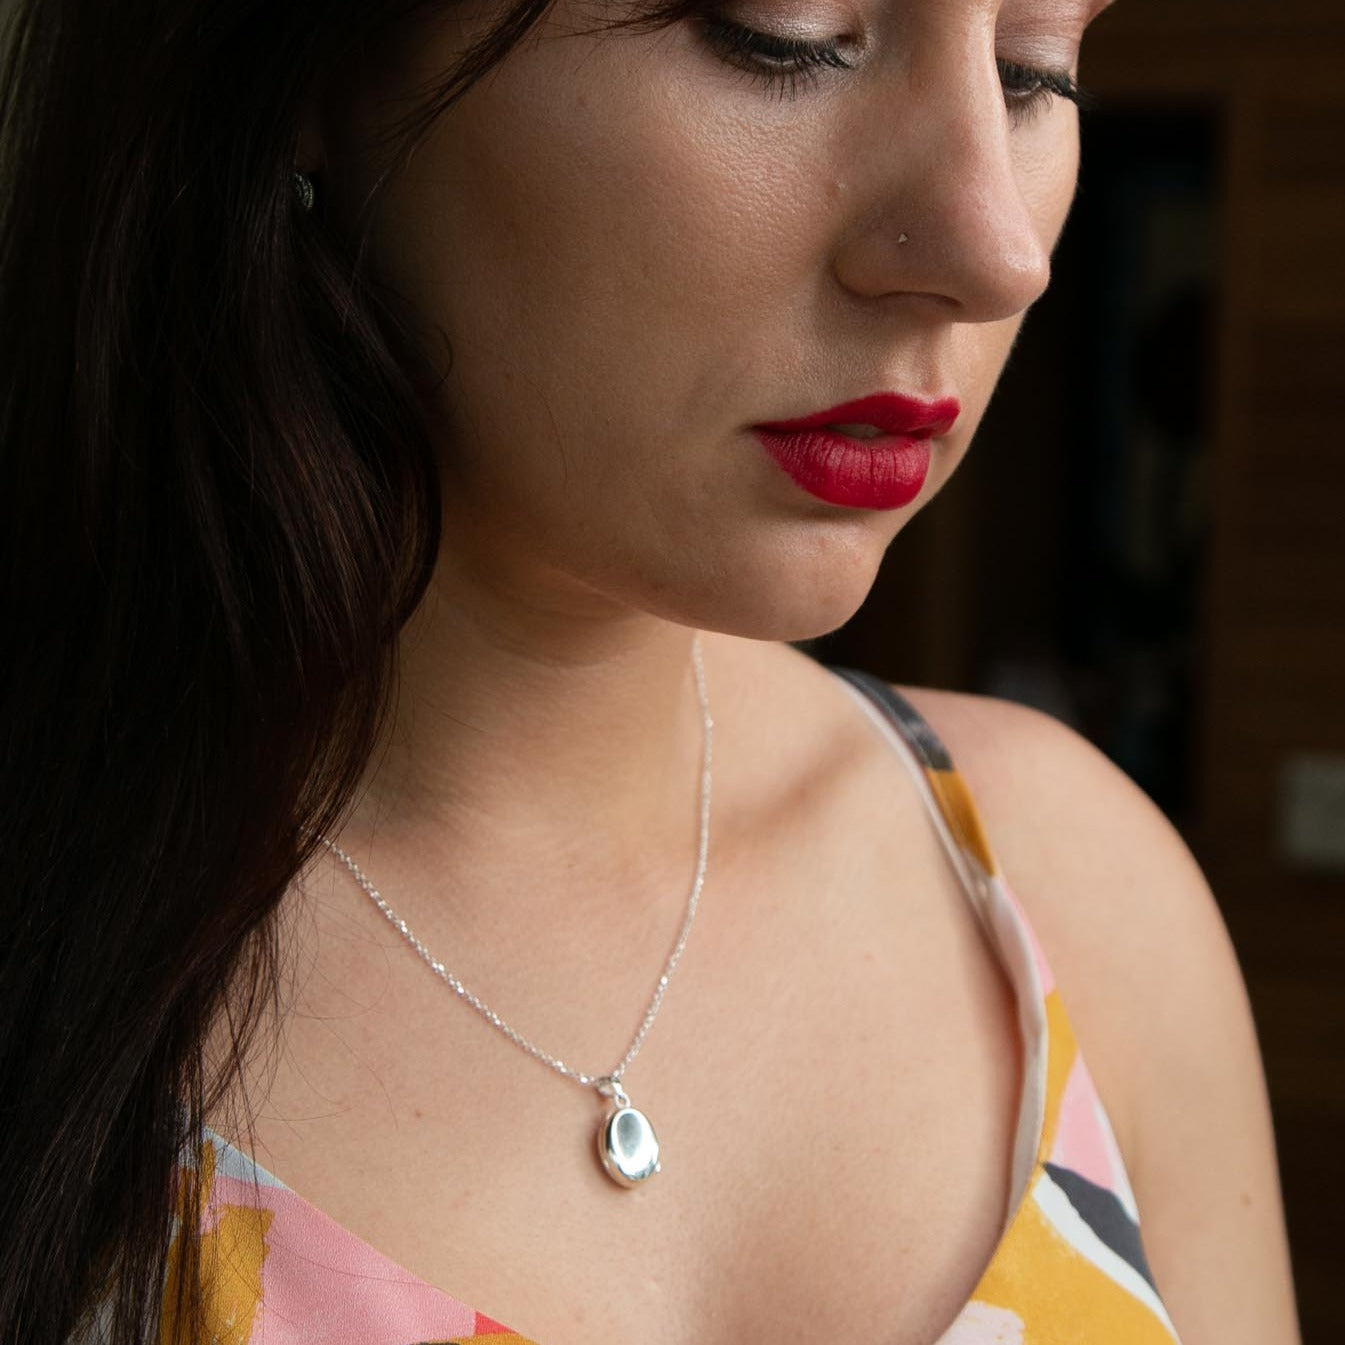 Model wearing small silver locket necklace on silver chain. Model is looking down and wearing colourful top.